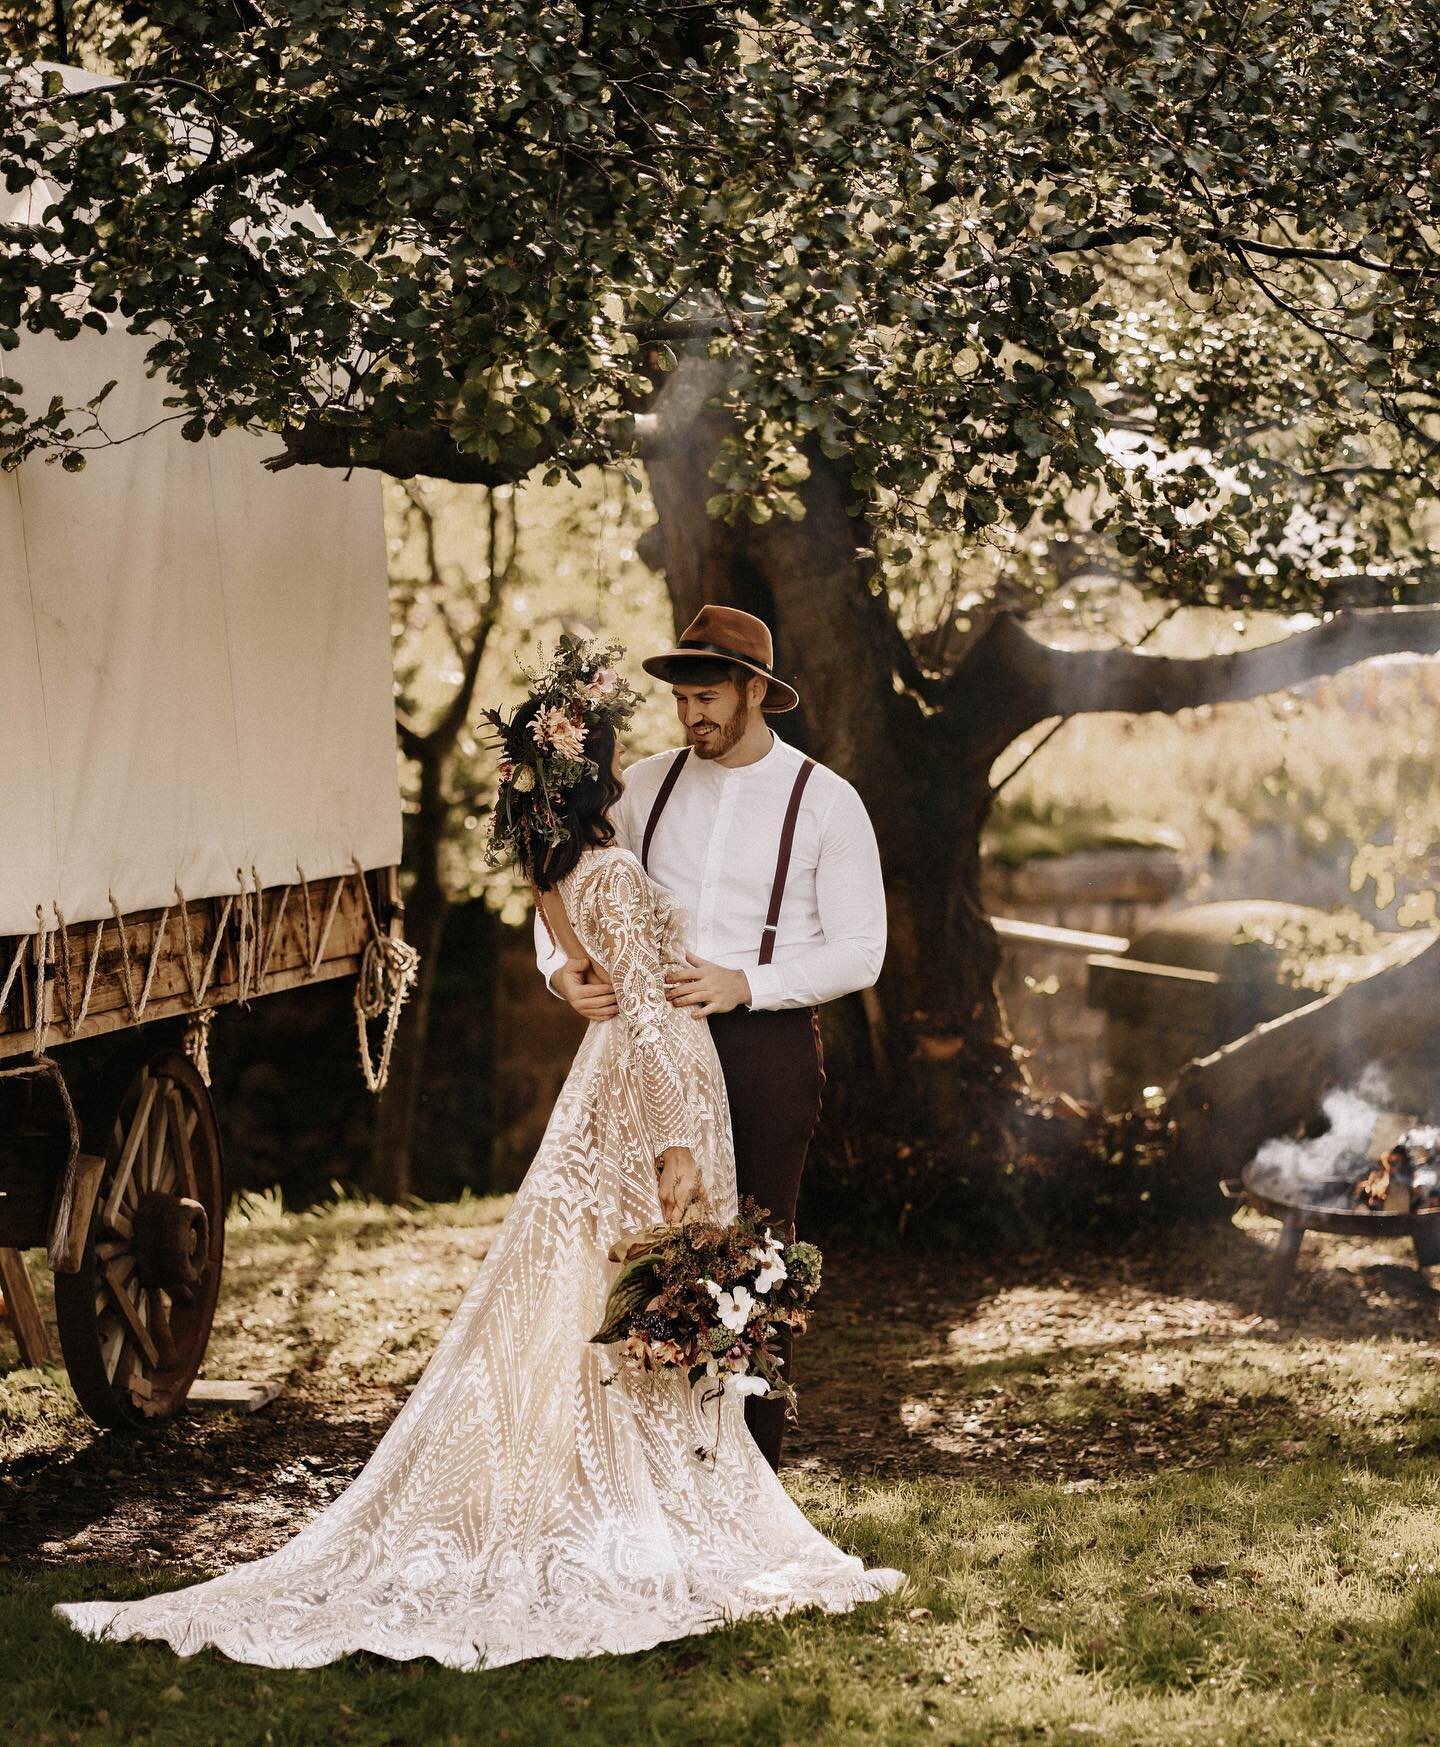 If you can look behind this beautiful couple...you&rsquo;ll see we have another addition to our accommodation options...&rdquo;the wagon&rdquo; is all kinds of perfect 🍂🧡 get in touch for more details. 

Photographer - @markbamforthphotography
Venu